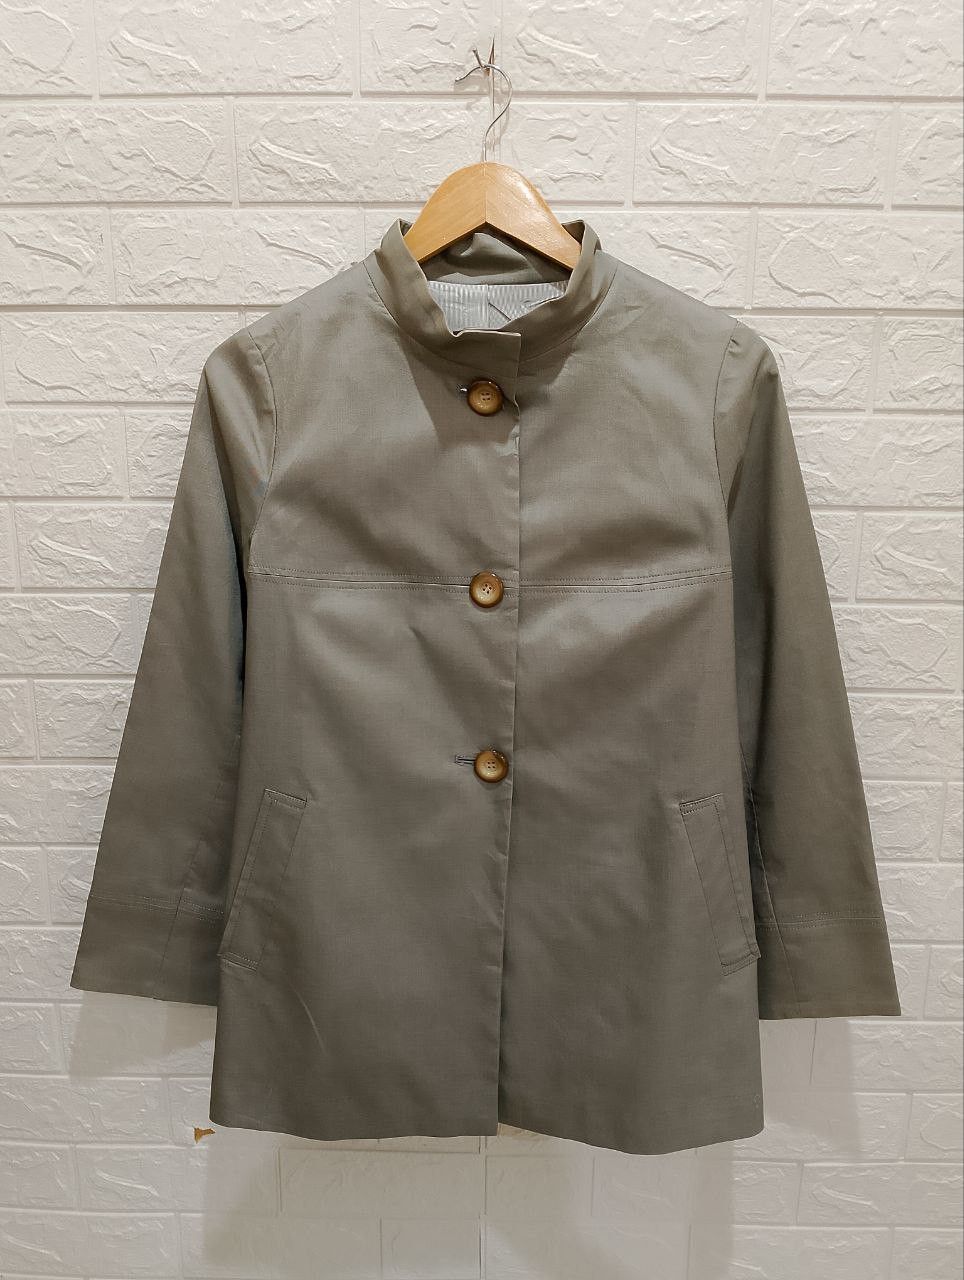 Archival Clothing - Creel Horaire Made in Japan Button Up Casual Jacket - 2